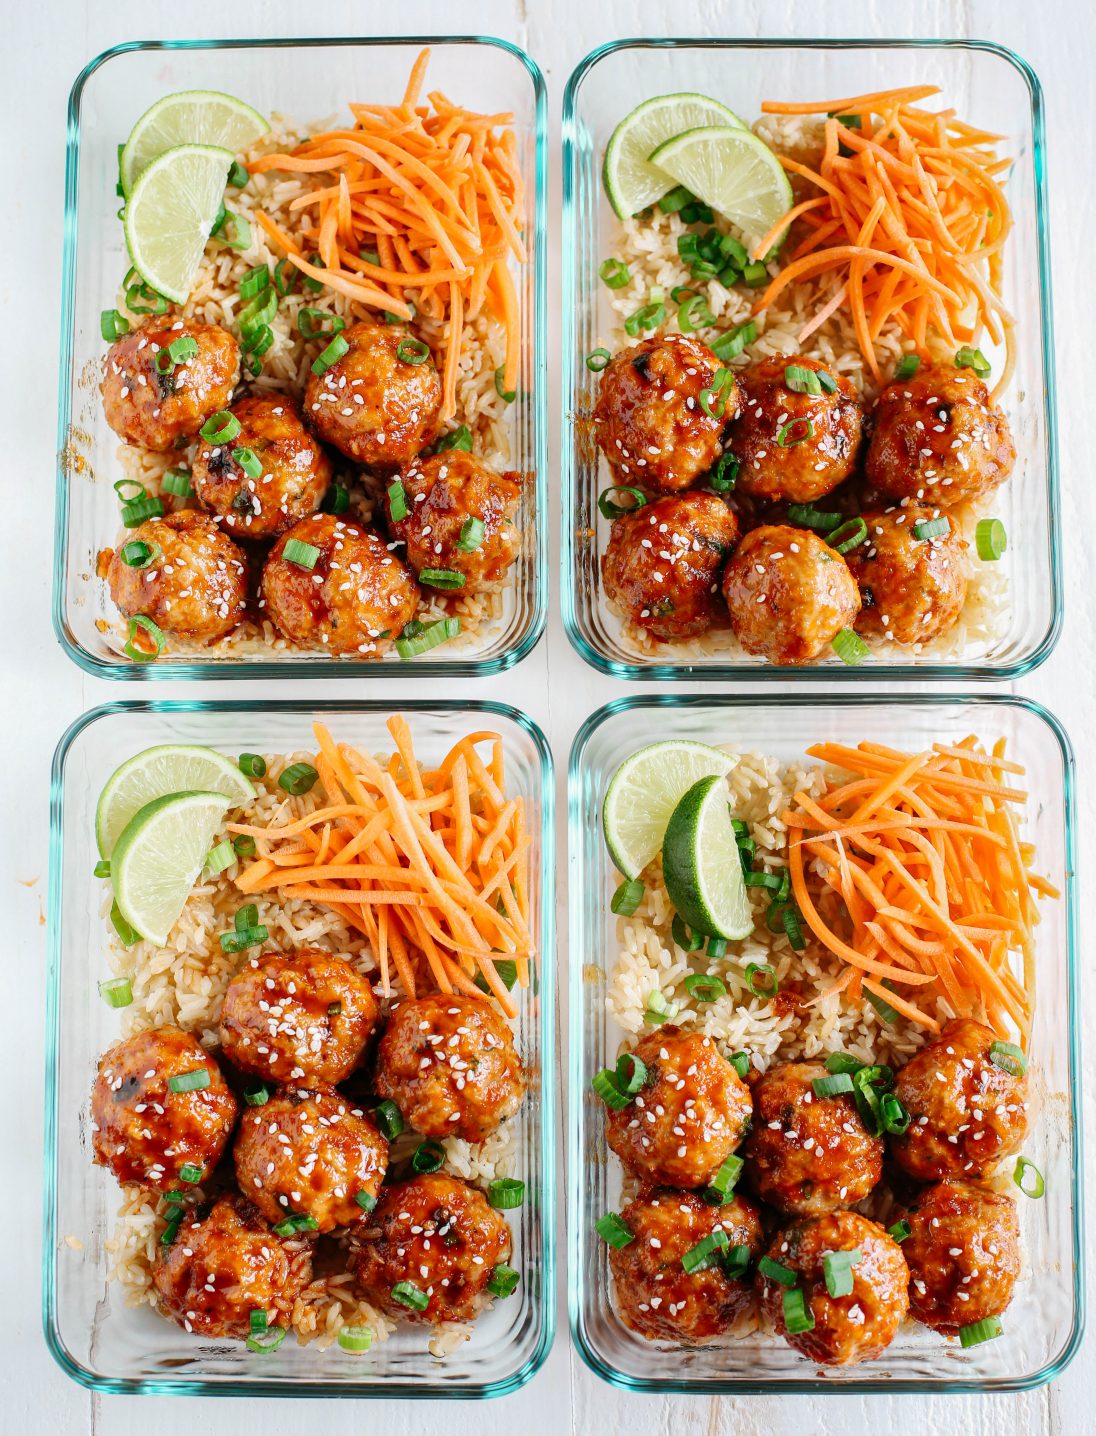 Healthy Meal Prep Ideas For Weight Loss Examples and Forms